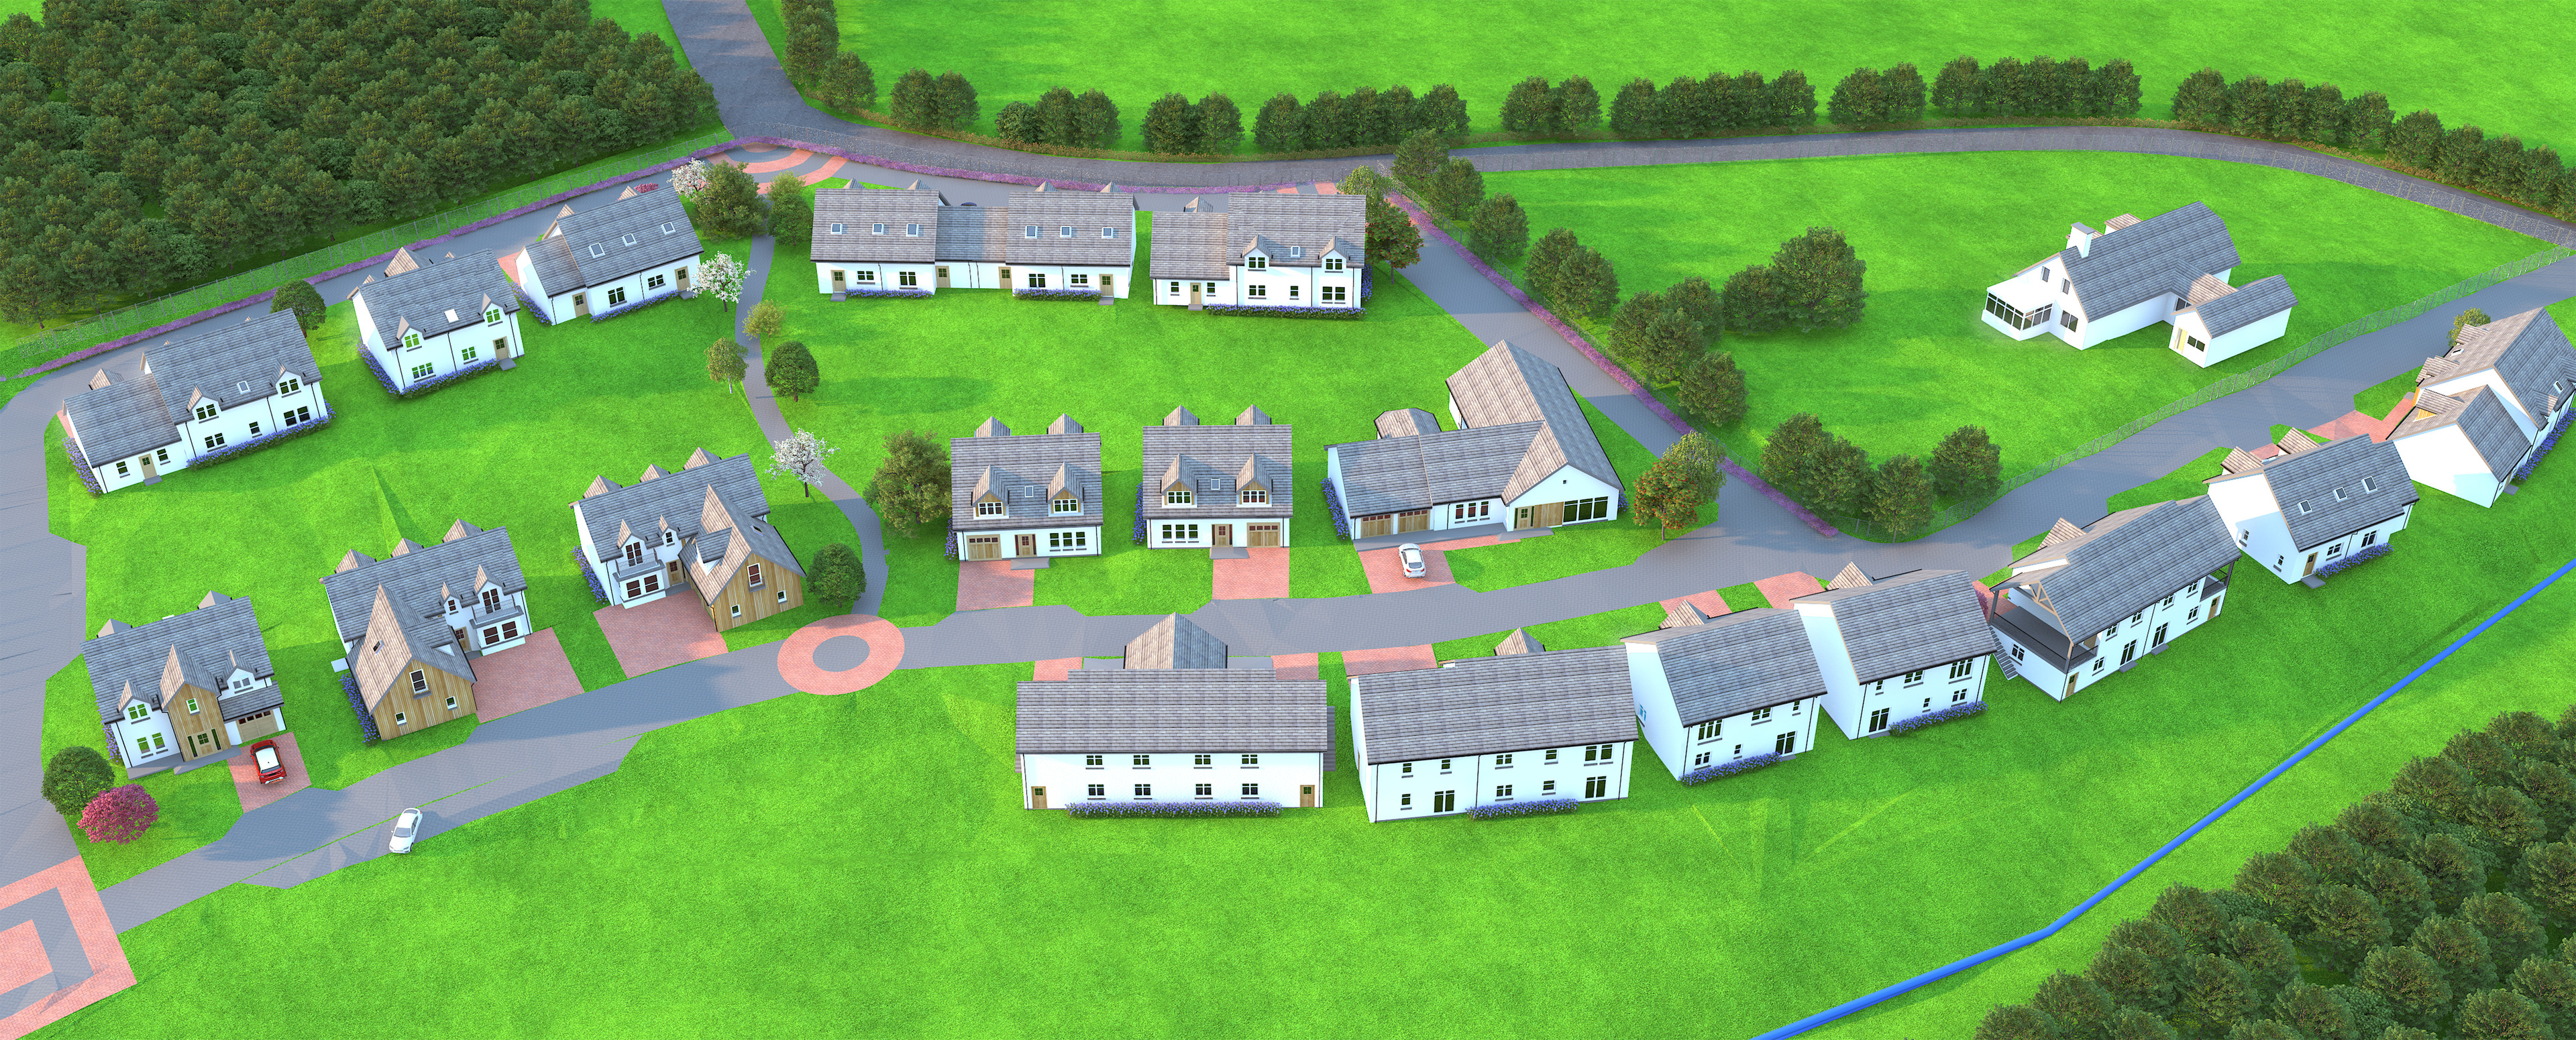 An artist's impression of the homes in Hatton